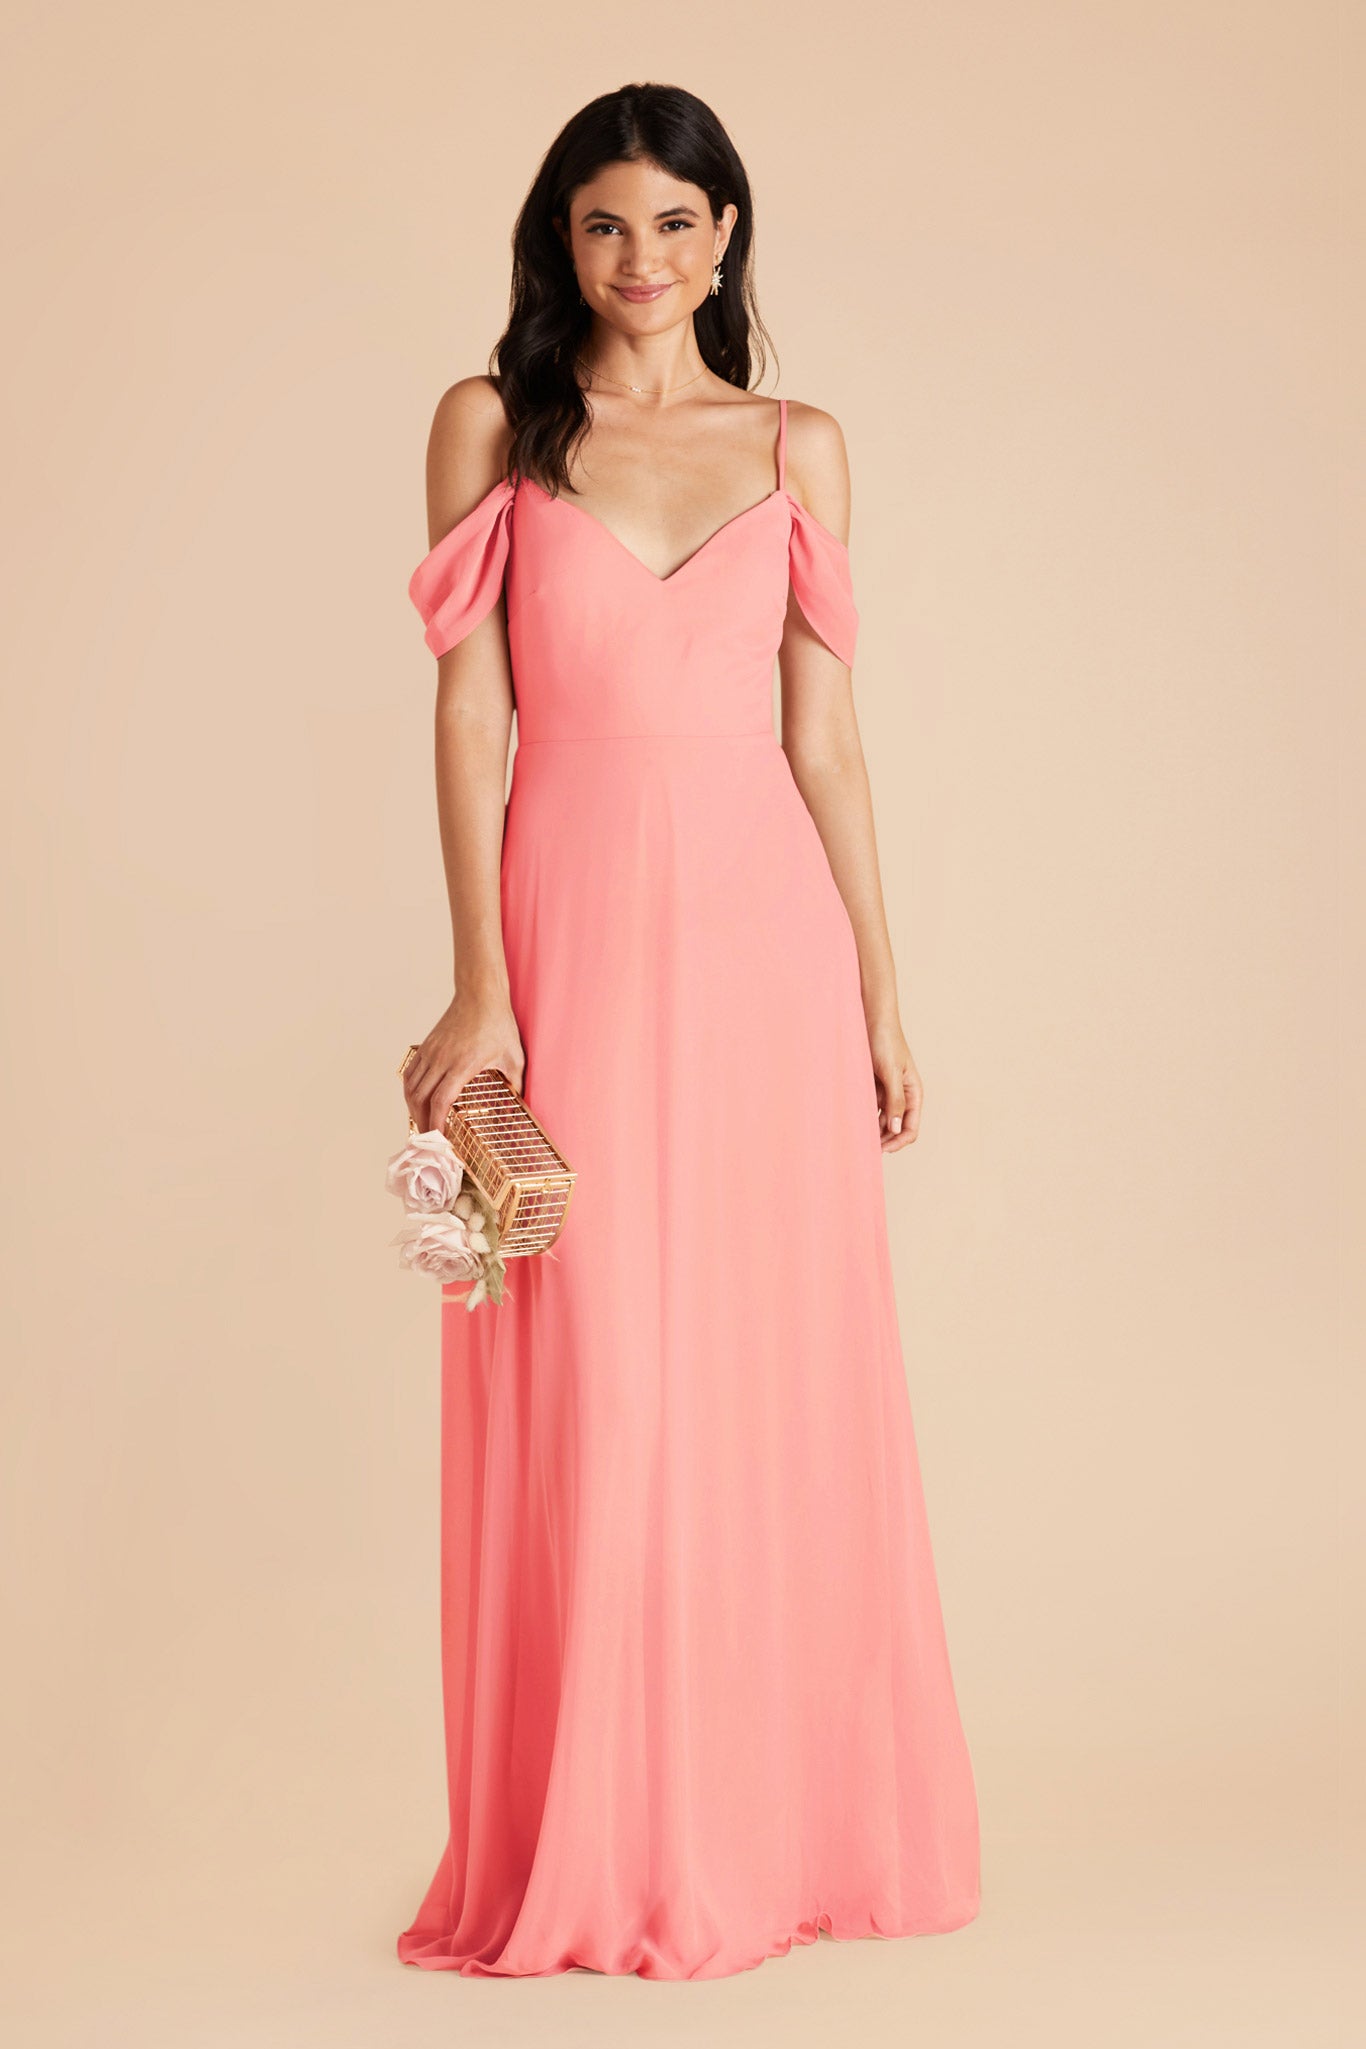 Coral Pink Devin Convertible Dress by Birdy Grey